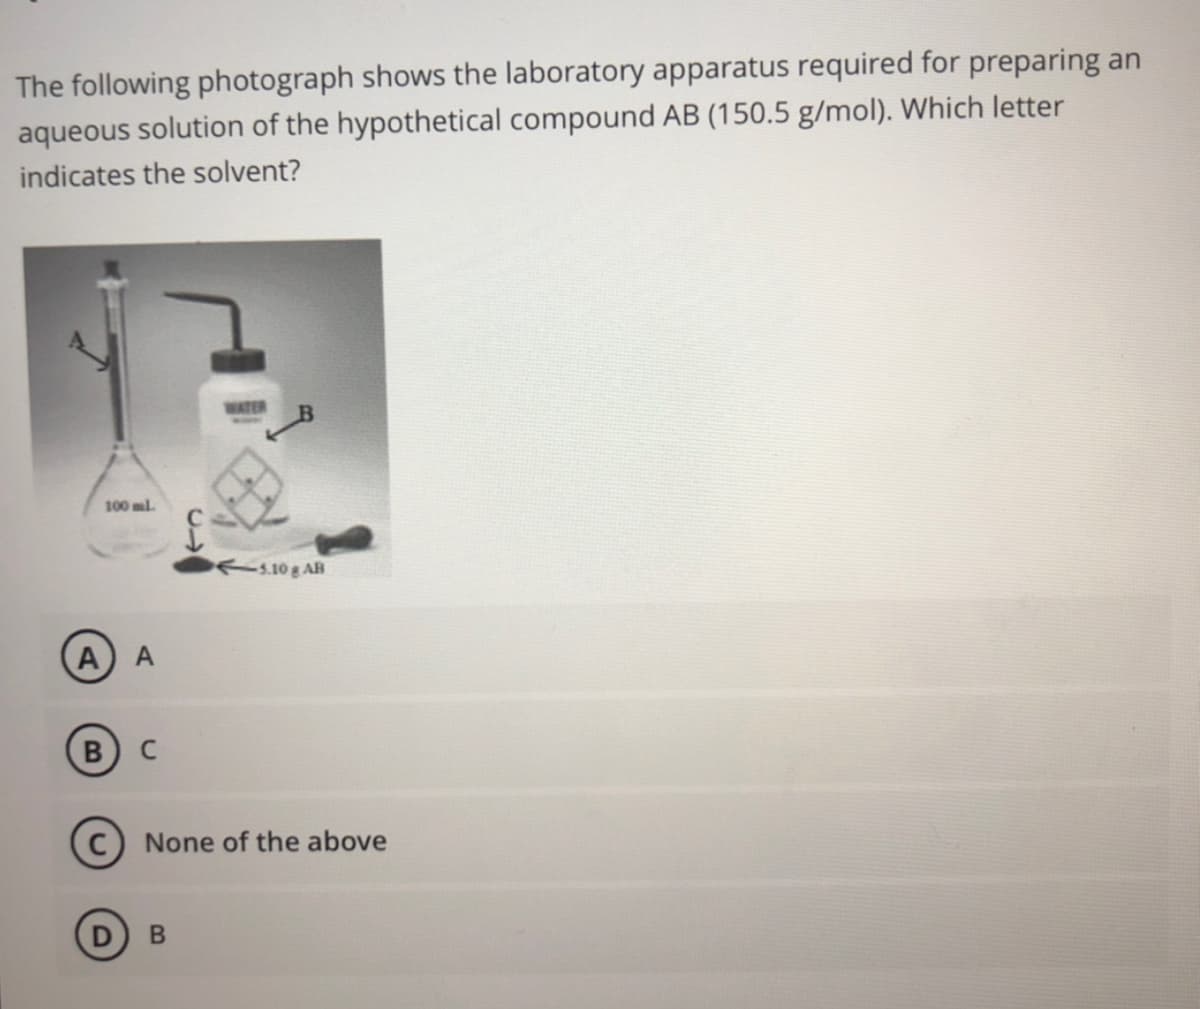 The following photograph shows the laboratory apparatus required for preparing an
aqueous solution of the hypothetical compound AB (150.5 g/mol). Which letter
indicates the solvent?
WATER
100 ml
s.10g AB
B
None of the above
